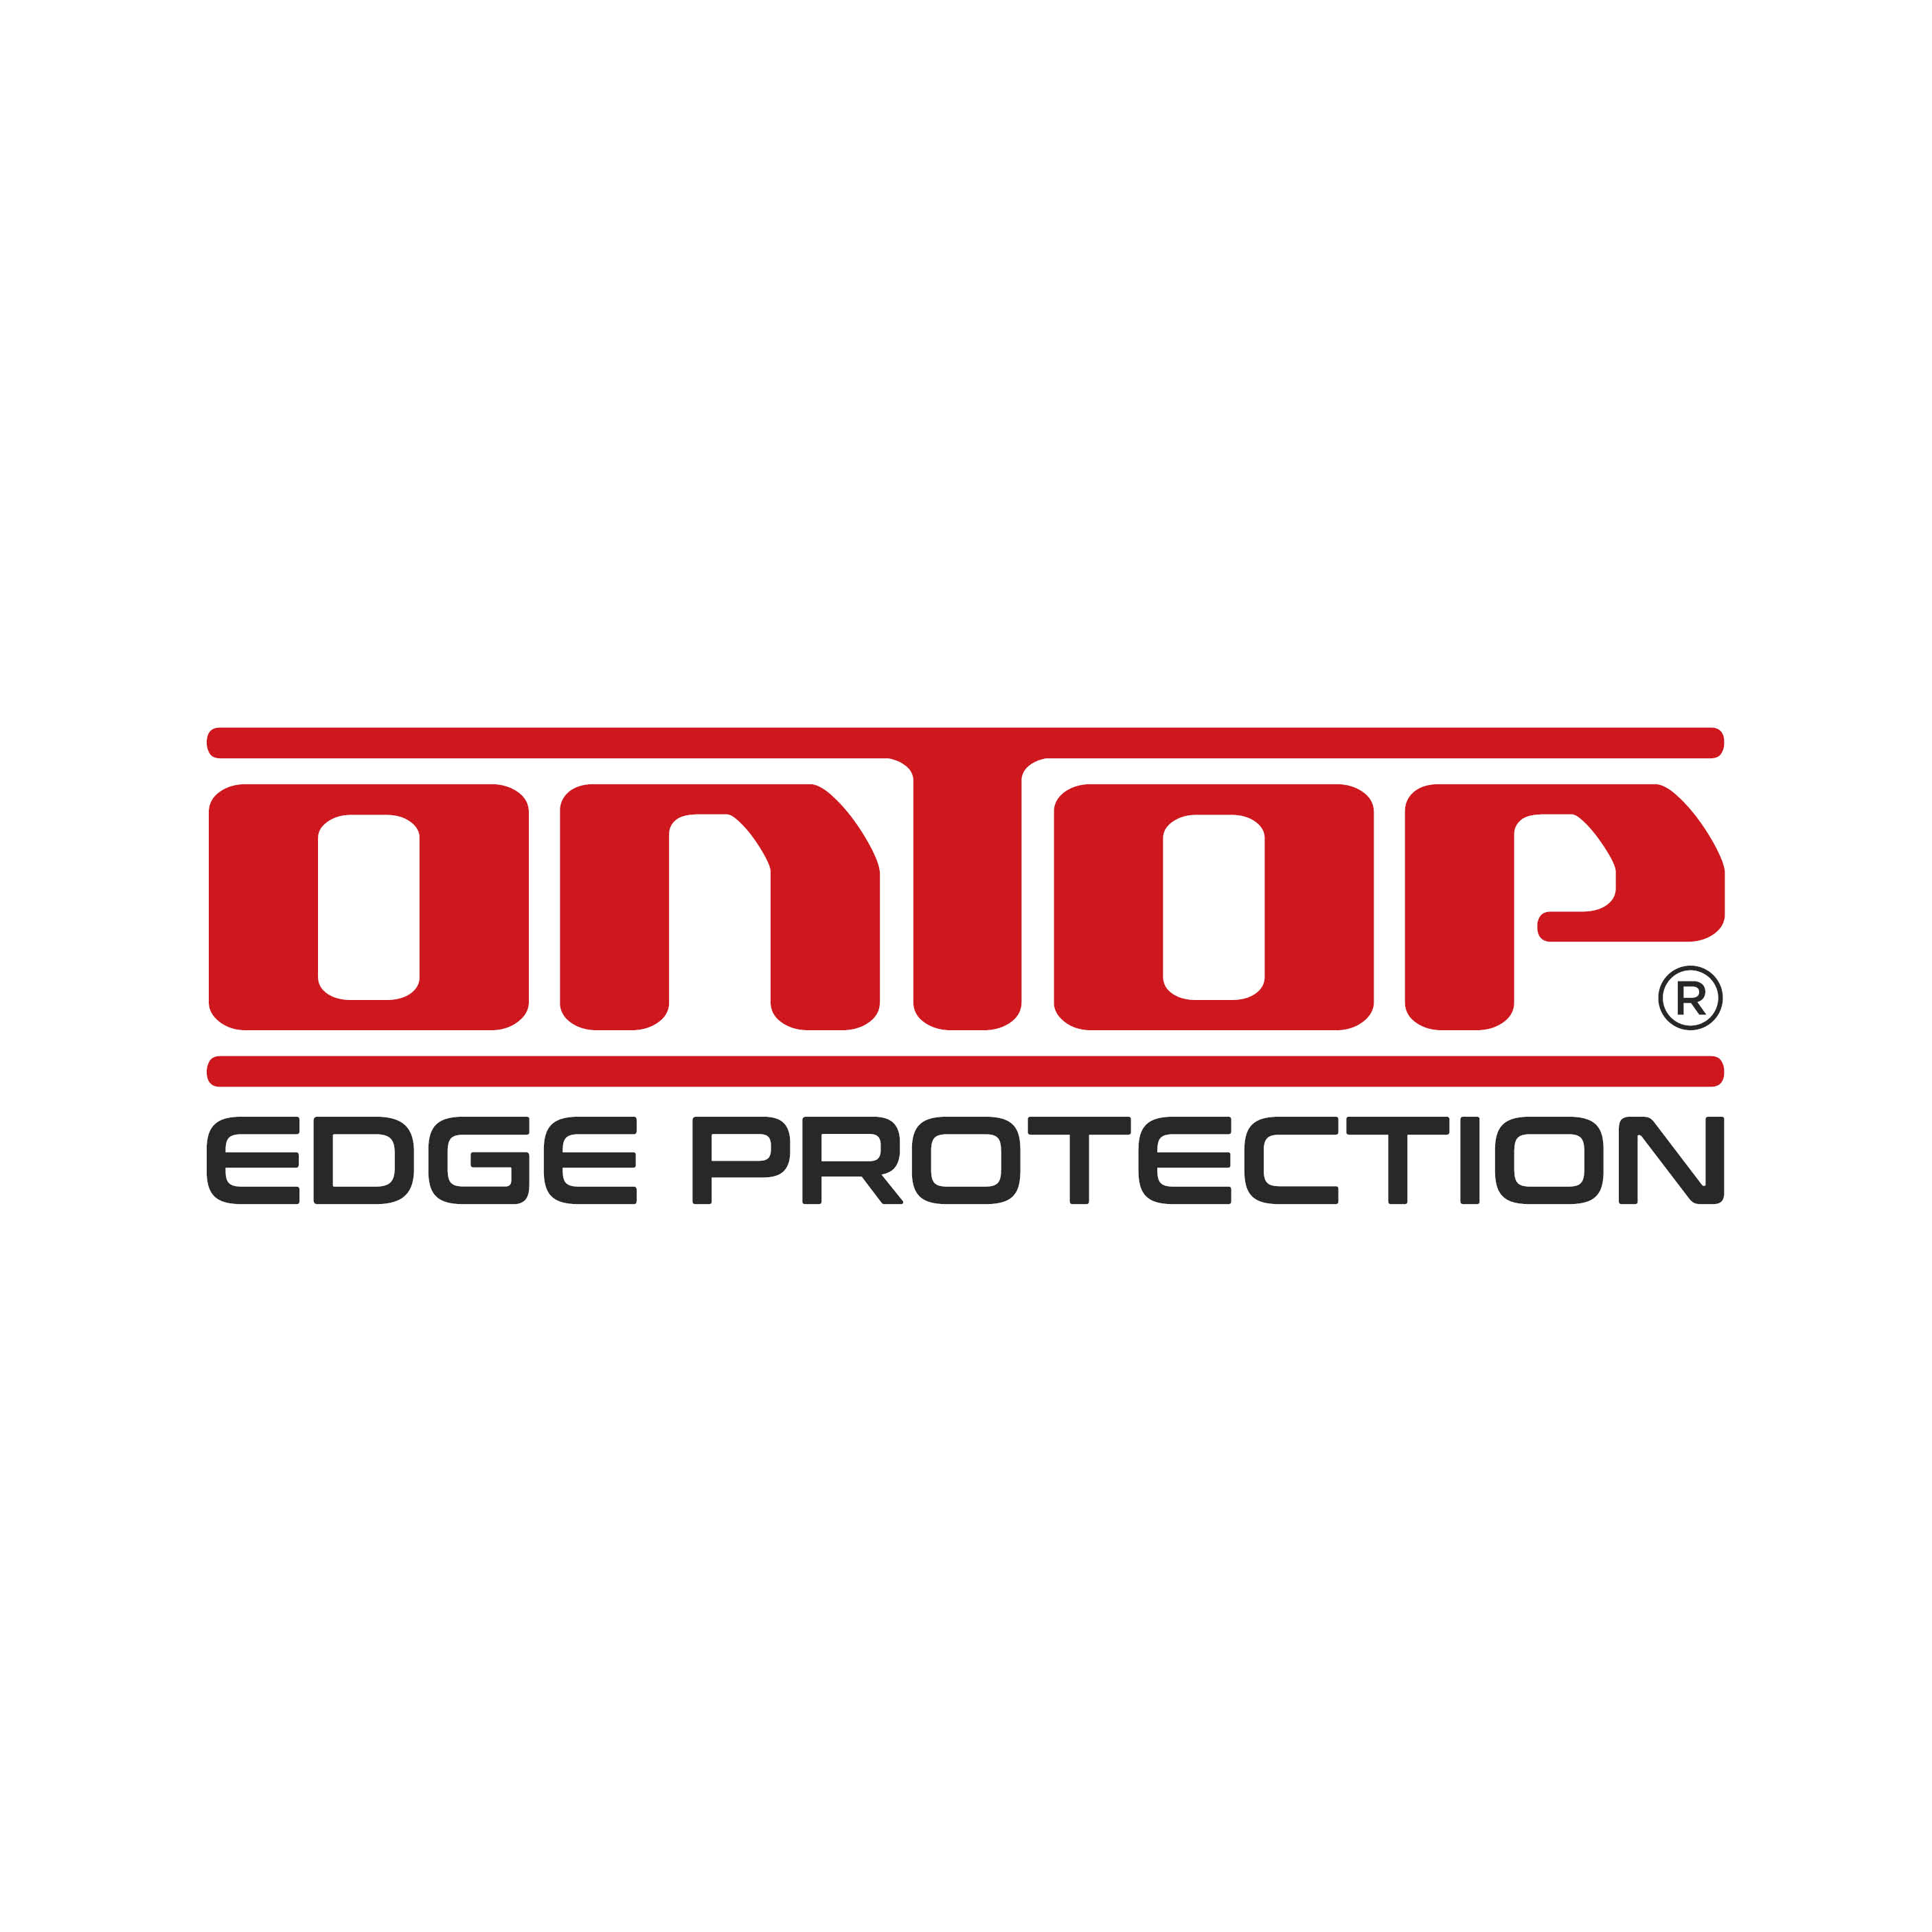 Ontop Protection Wordmark logo design by logo designer Duffy Design Co for your inspiration and for the worlds largest logo competition